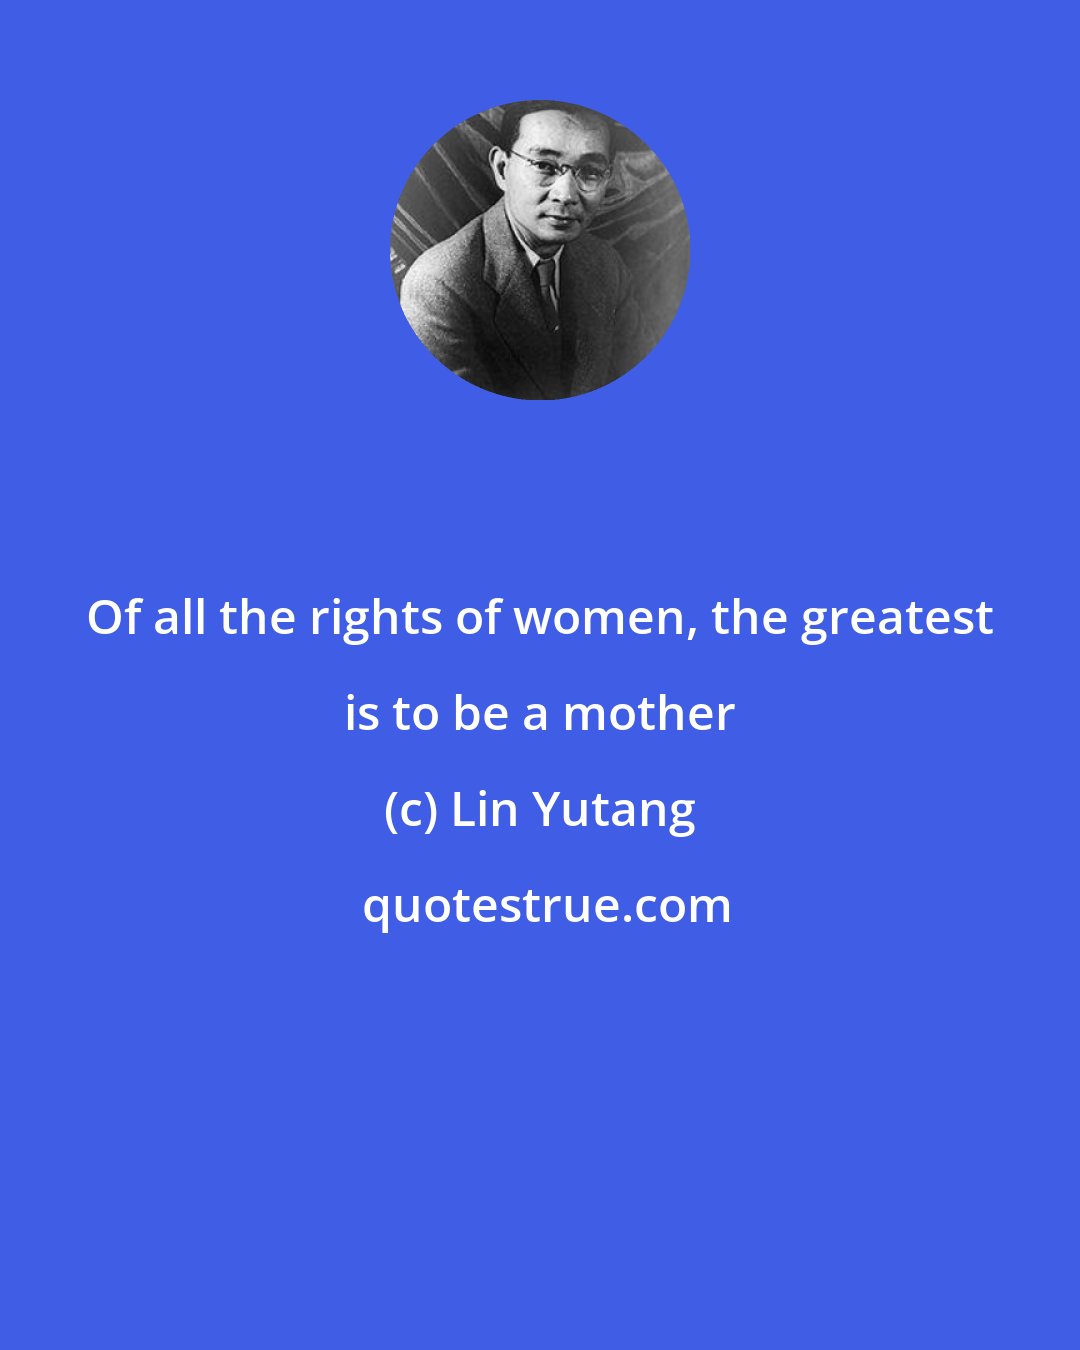 Lin Yutang: Of all the rights of women, the greatest is to be a mother